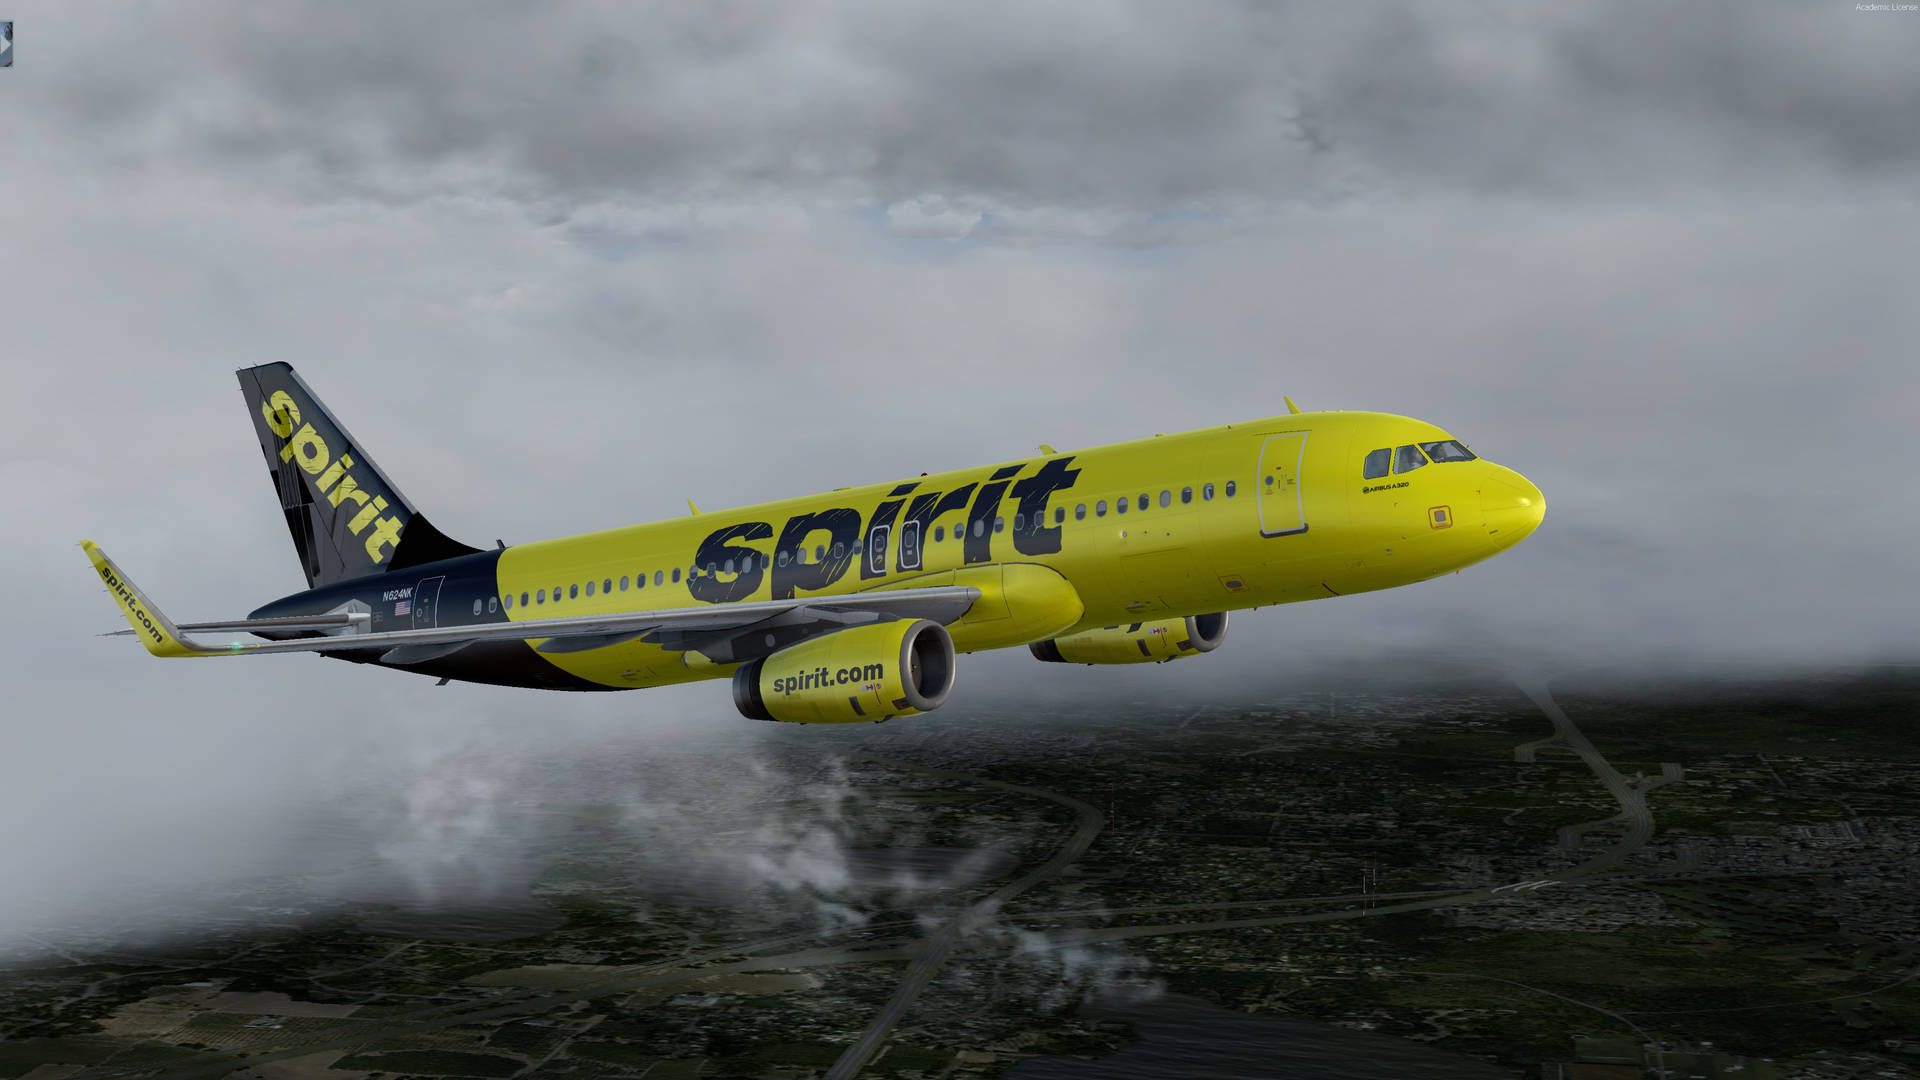 Black Tailed Spirit Airlines Airplane Background